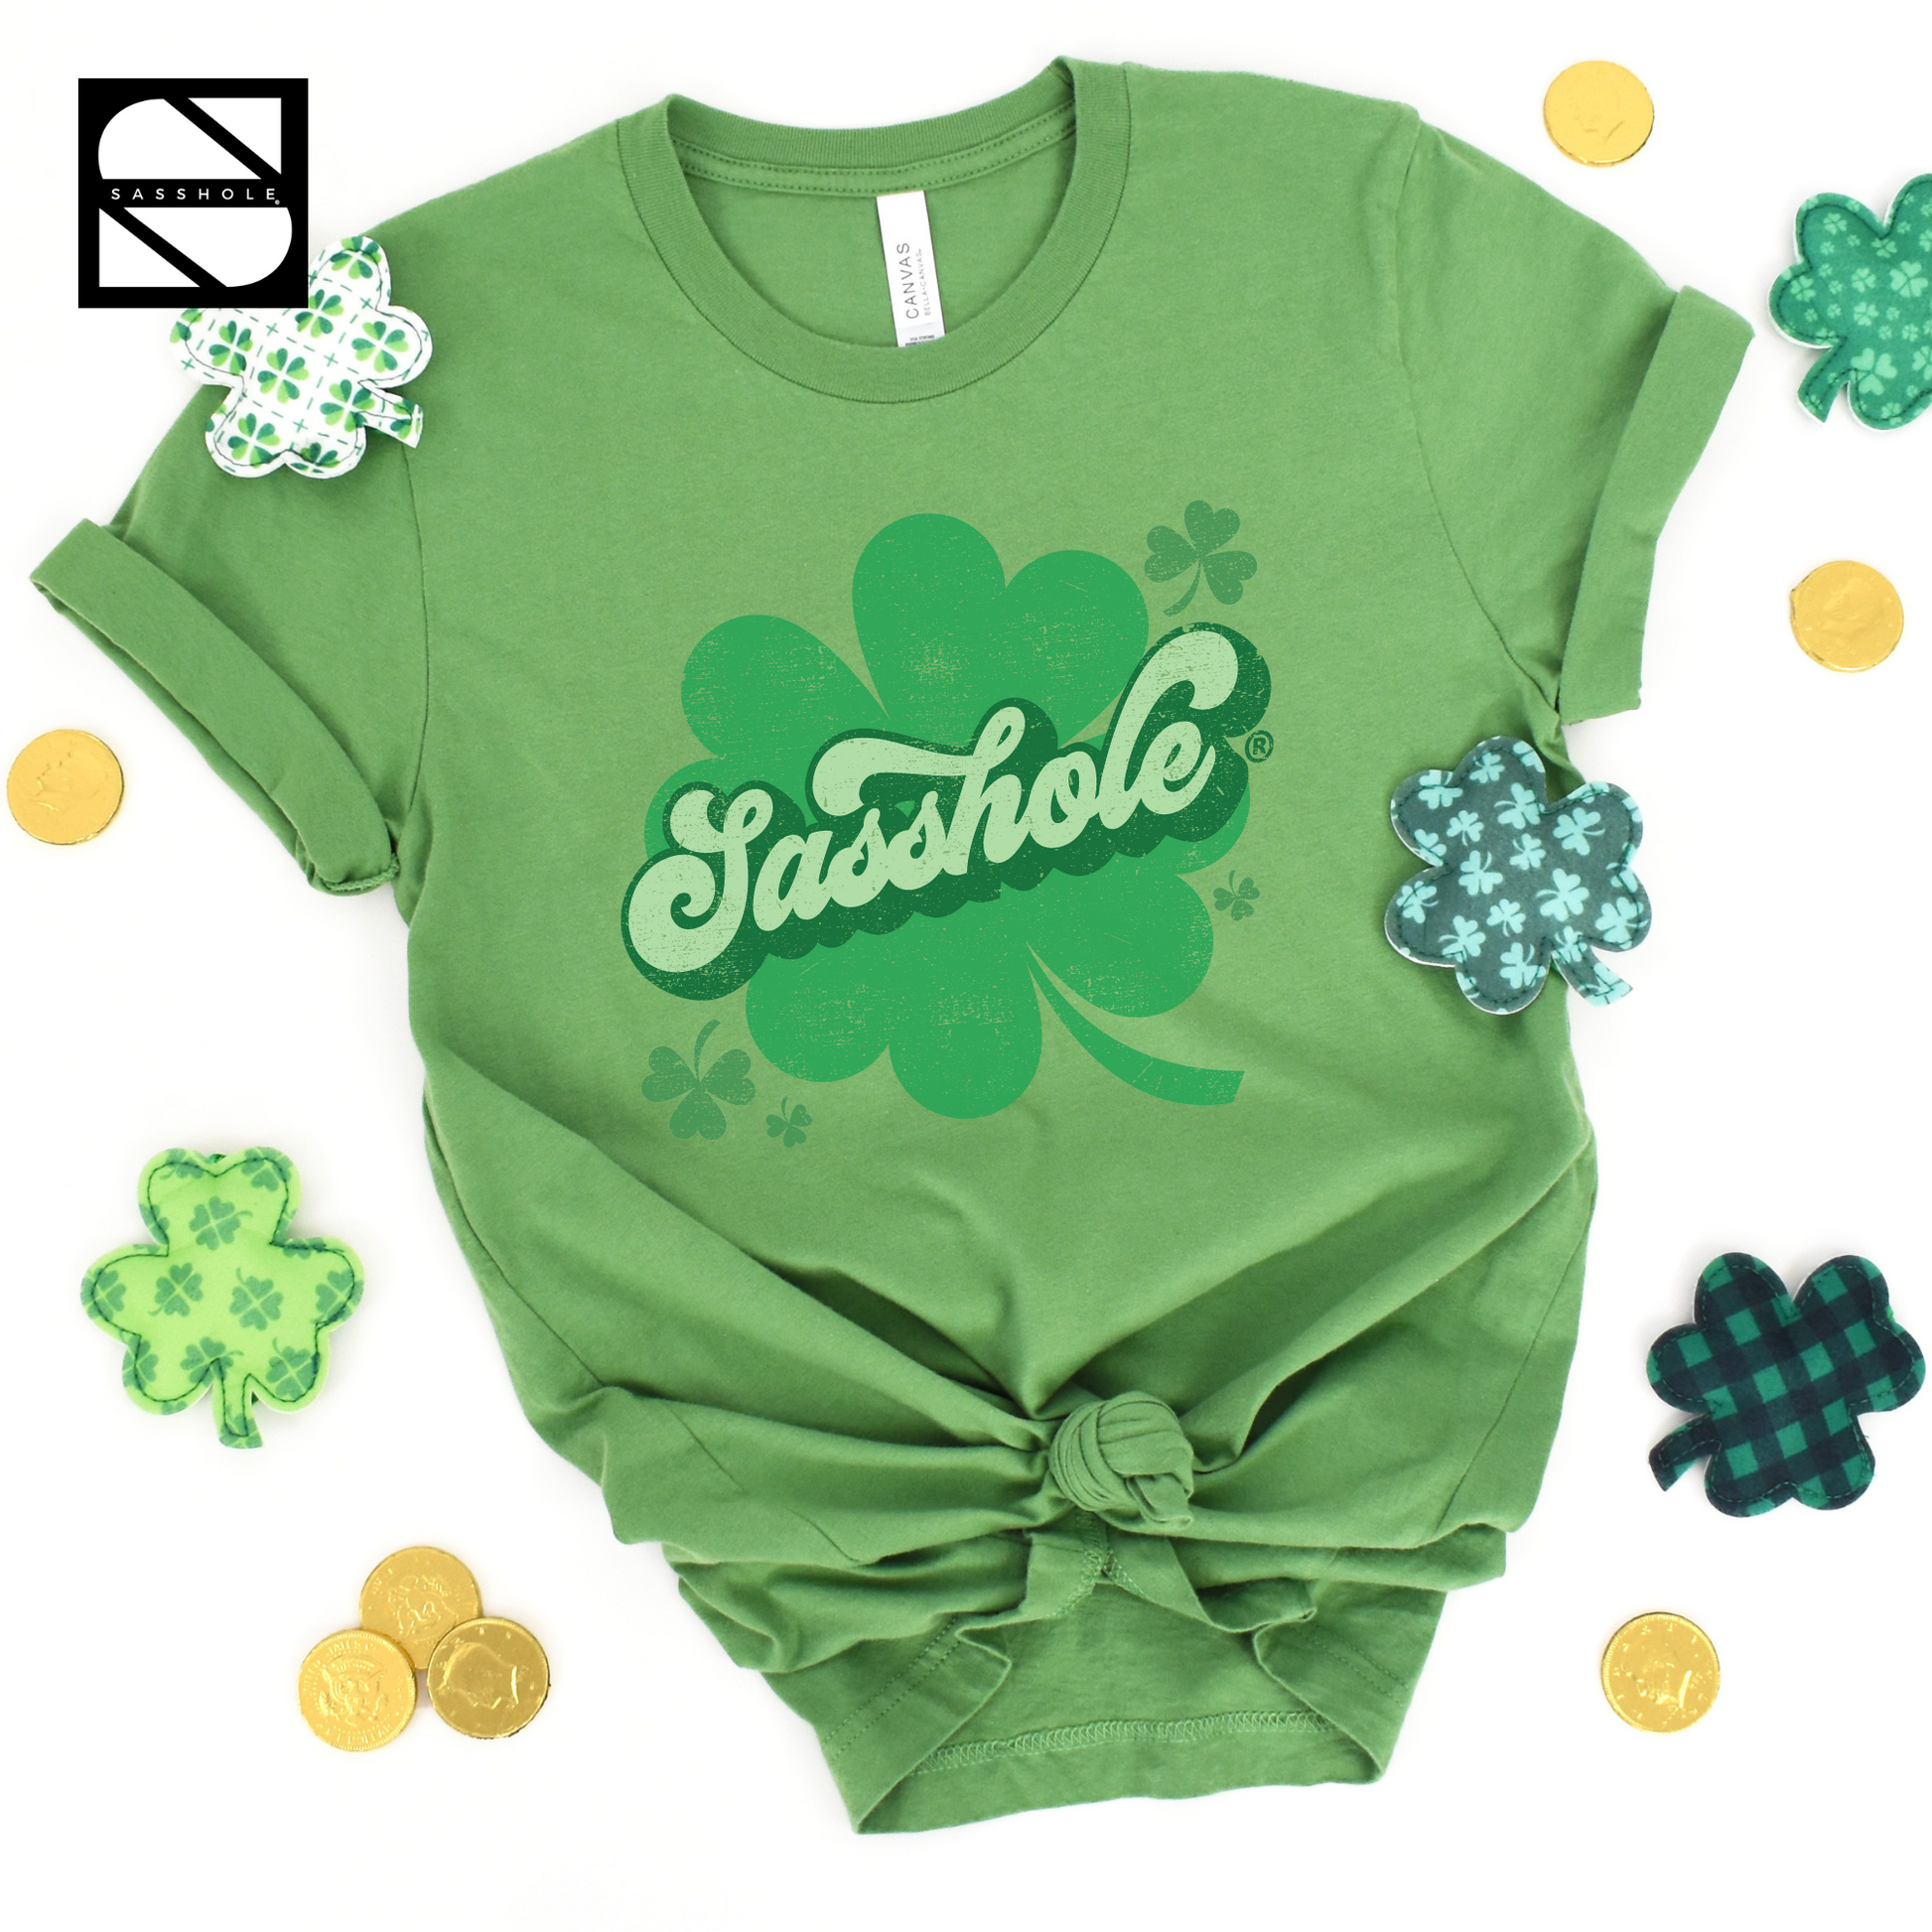 Women's St. Pat's apparel, Women's Clothing, Unisex Irish tee, Unisex, Unique Irish tops, Unique Irish humor tee, Unique Irish charm tee, Trendy St. Patrick's Day top, T-shirts, St. Patrick's party apparel, St. Patrick's festivities wear, St. Patrick's fashion, St. Patrick's Day shirt, St. Patrick's Day humor, St Patricks Day Shirt Women, Shamrock sassiness, Shamrock outfit, Sassy St. Patrick's Day wear, Sassy St. Pat's wear, Sasshole® luck style